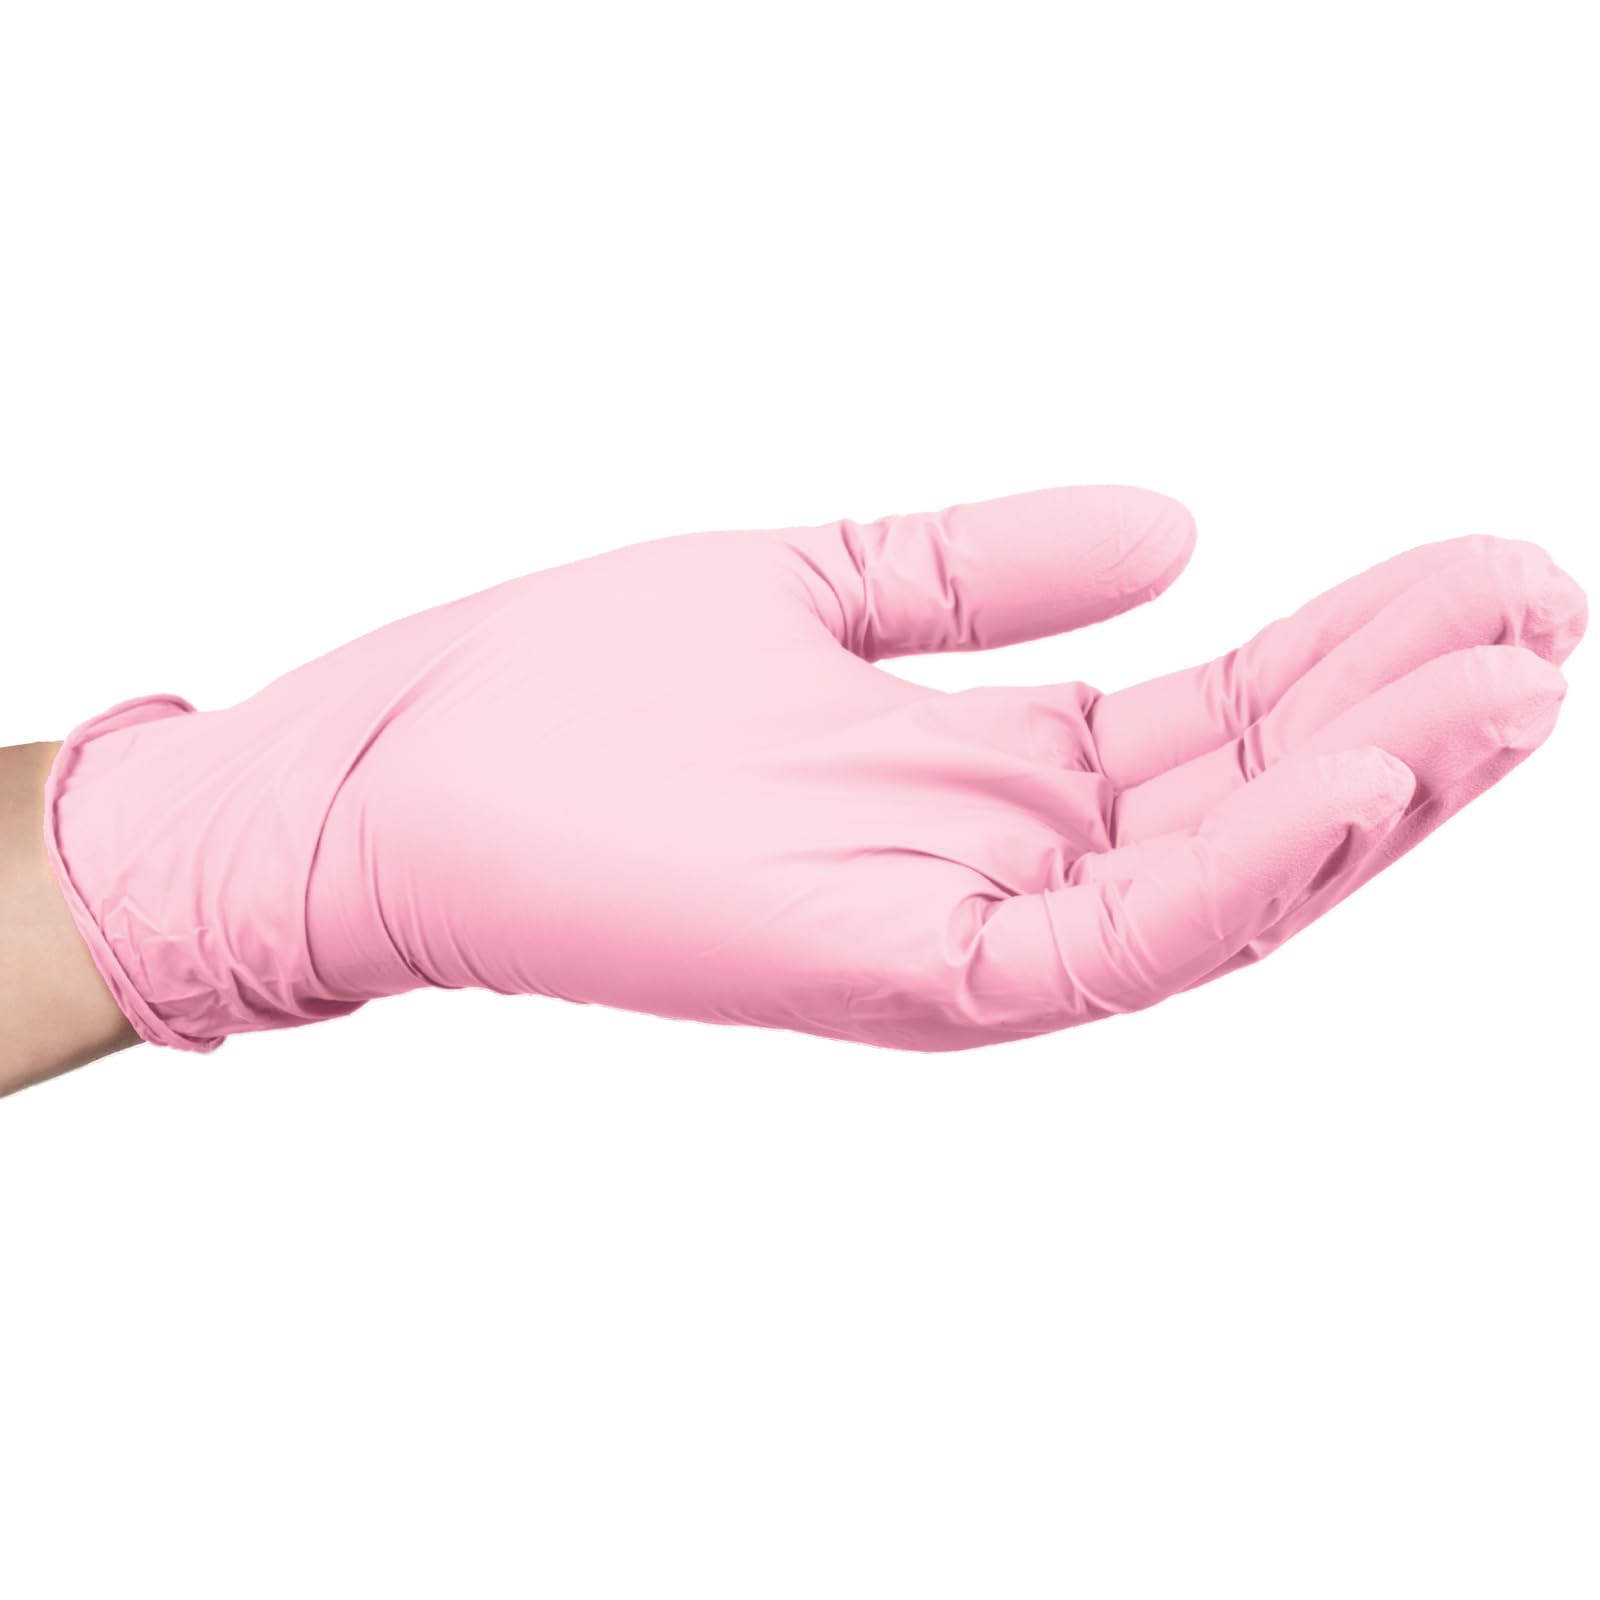 ForPro Disposable Nitrile Gloves, Chemical Resistant, Powder-Free, Latex-Free, Non-Sterile, Food Safe, 4 Mil, Pink, Medium, 100-Count